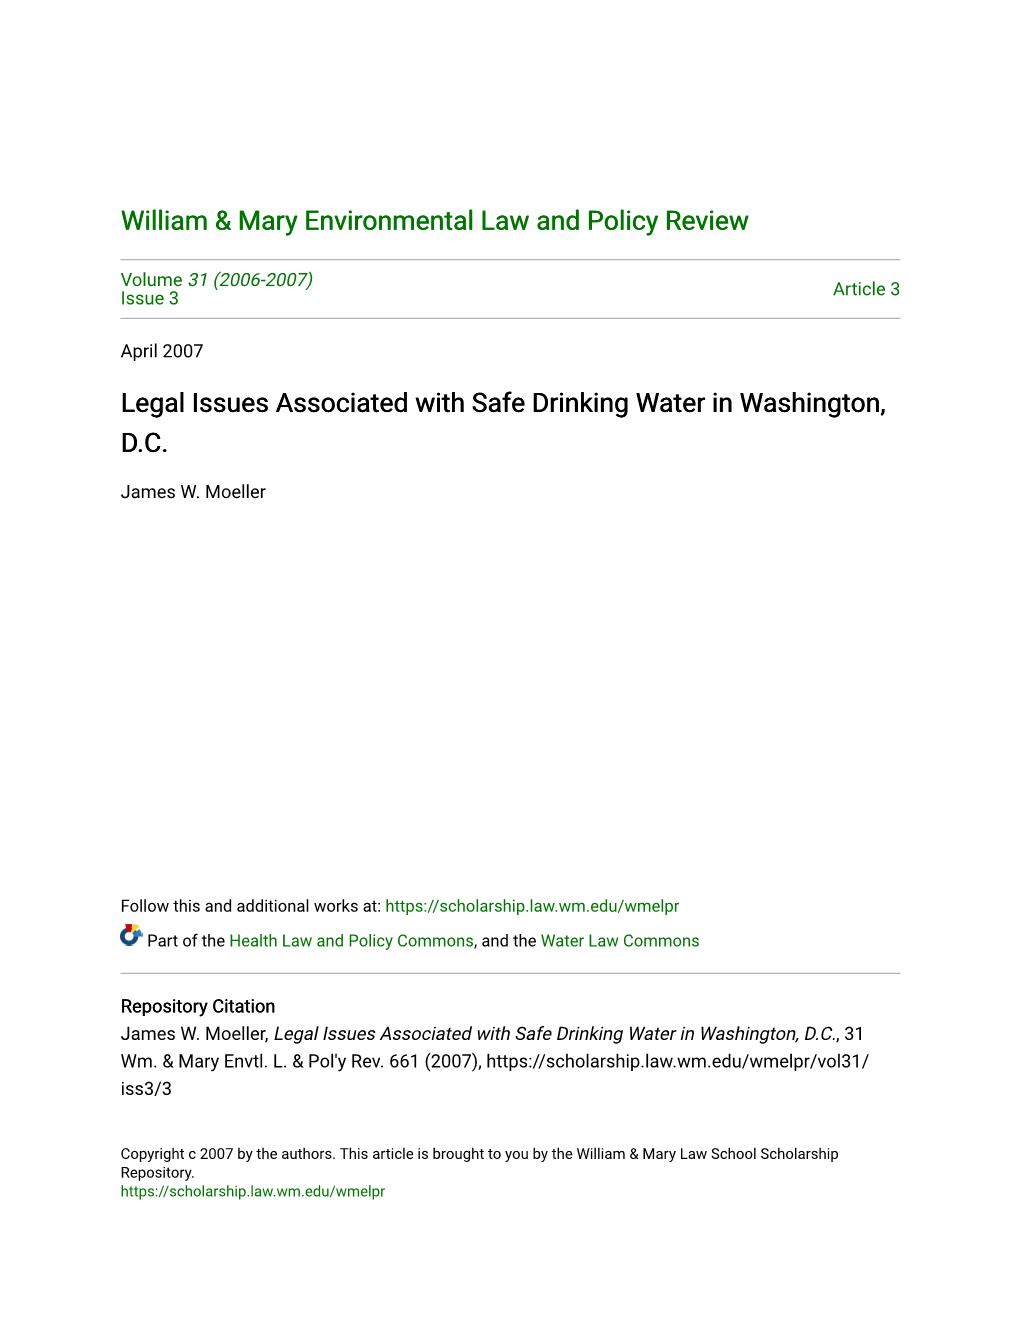 Legal Issues Associated with Safe Drinking Water in Washington, D.C